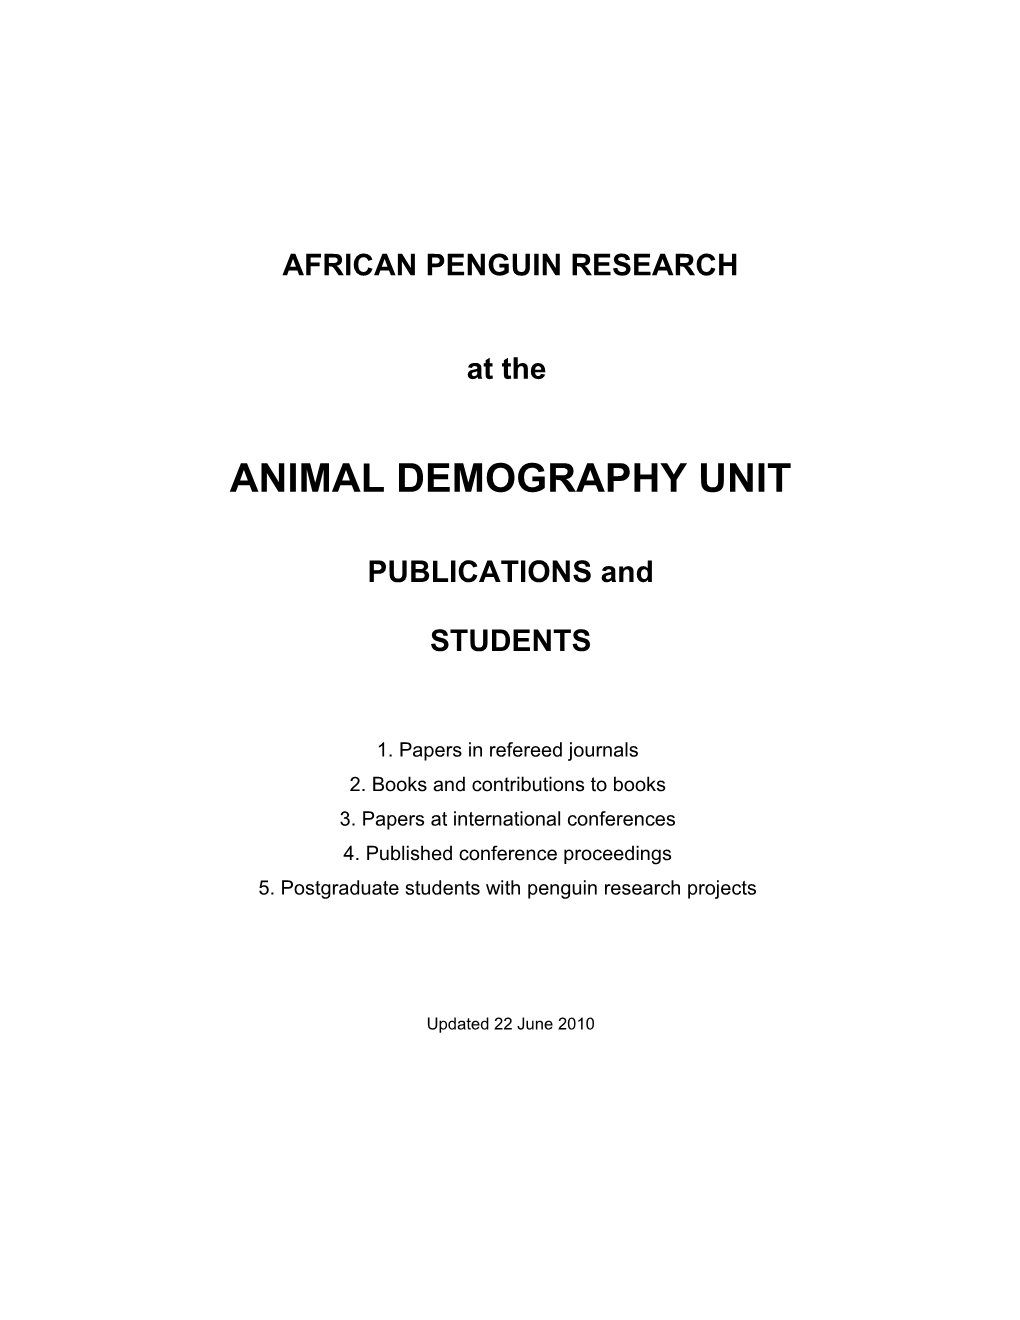 African Penguin Research